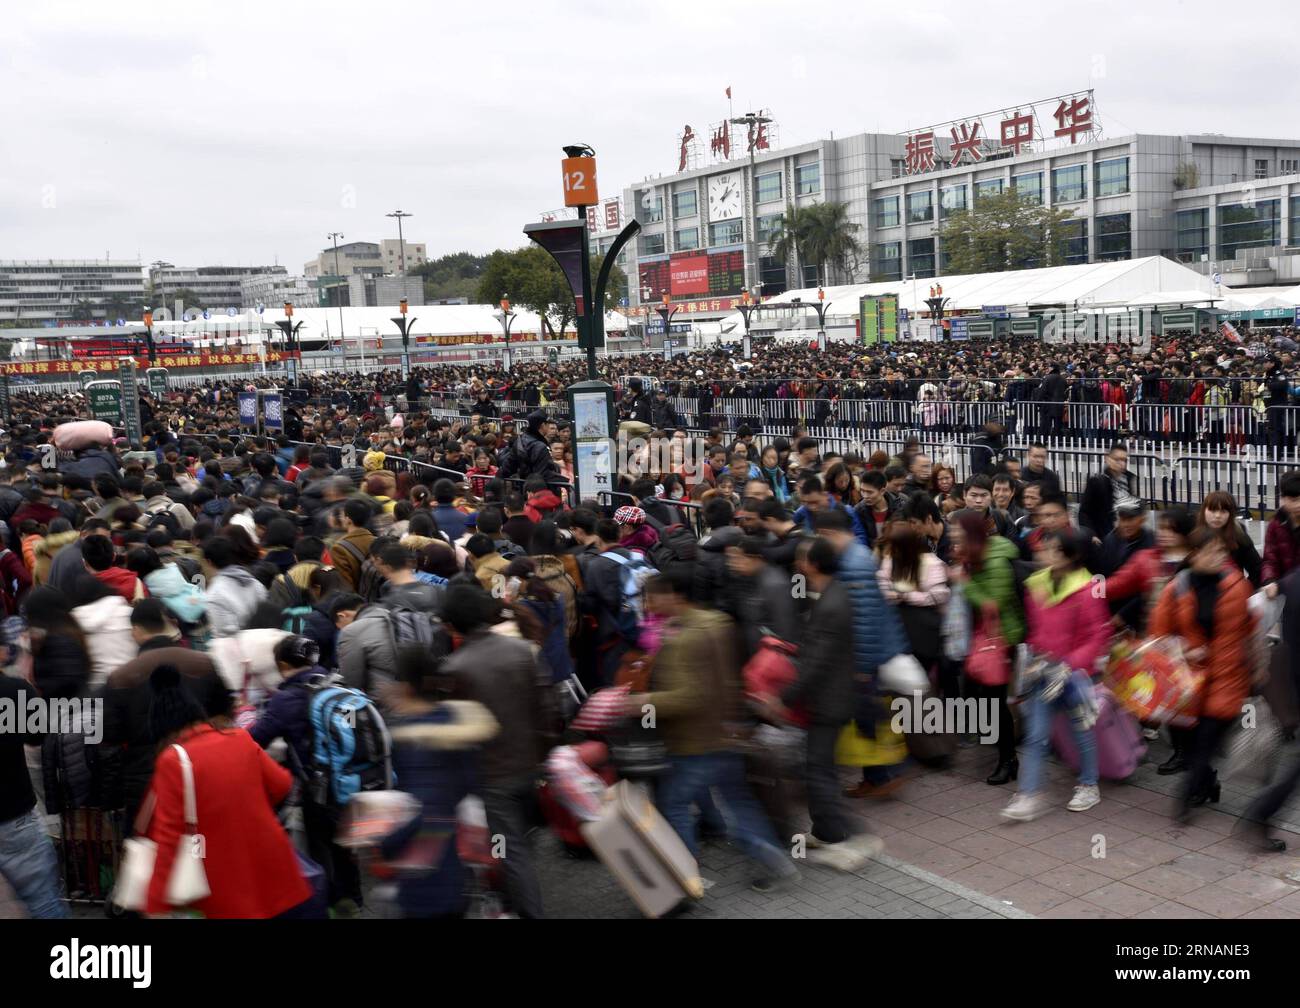 (160202) -- GUANGZHOU, Feb. 2, 2016 -- Passengers rushing home for the coming Spring Festival, or the Chinese Lunar New Year, are seen stranded out of Guangzhou railway station in Guangzhou,south China s Guangdong Province, Feb. 2, 2016. Some 50,000 passengers were detained in the railway station due to delays of trains caused by continous bad weather. ) (cxy) CHINA-GUANGZHOU-RAILWAY-PASSENGER-DELAY (CN) LuxHanxin PUBLICATIONxNOTxINxCHN   Guangzhou Feb 2 2016 Passengers Rushing Home for The Coming Spring Festival or The Chinese Lunar New Year are Lakes stranded out of Guangzhou Railway Station Stock Photo